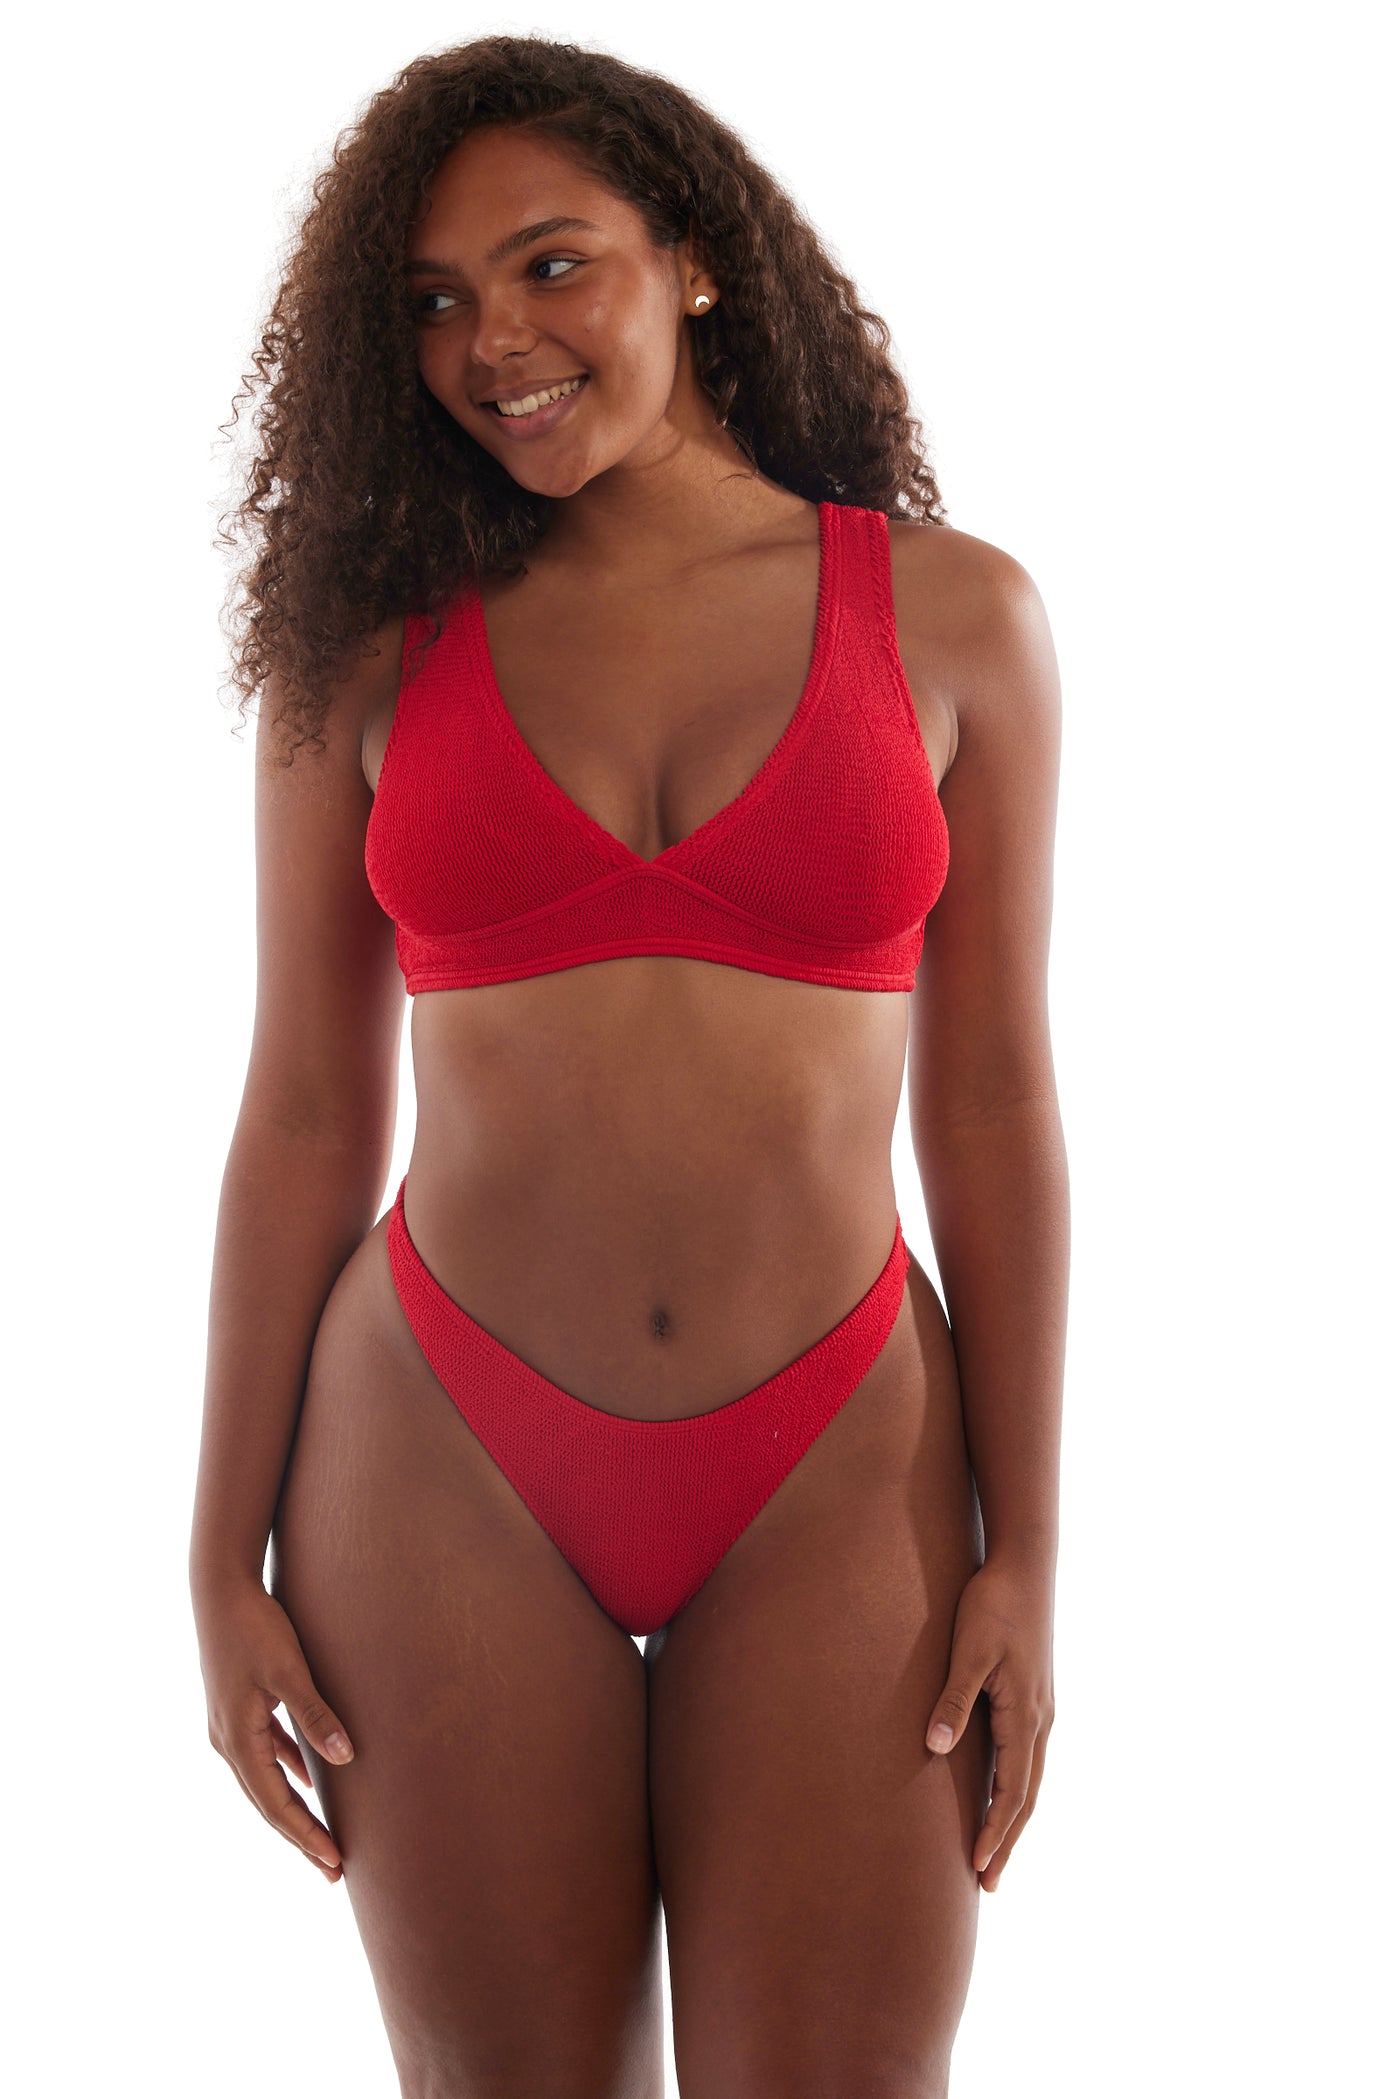 Maui V-Neck One Size Bikini TOP ONLY (Red)